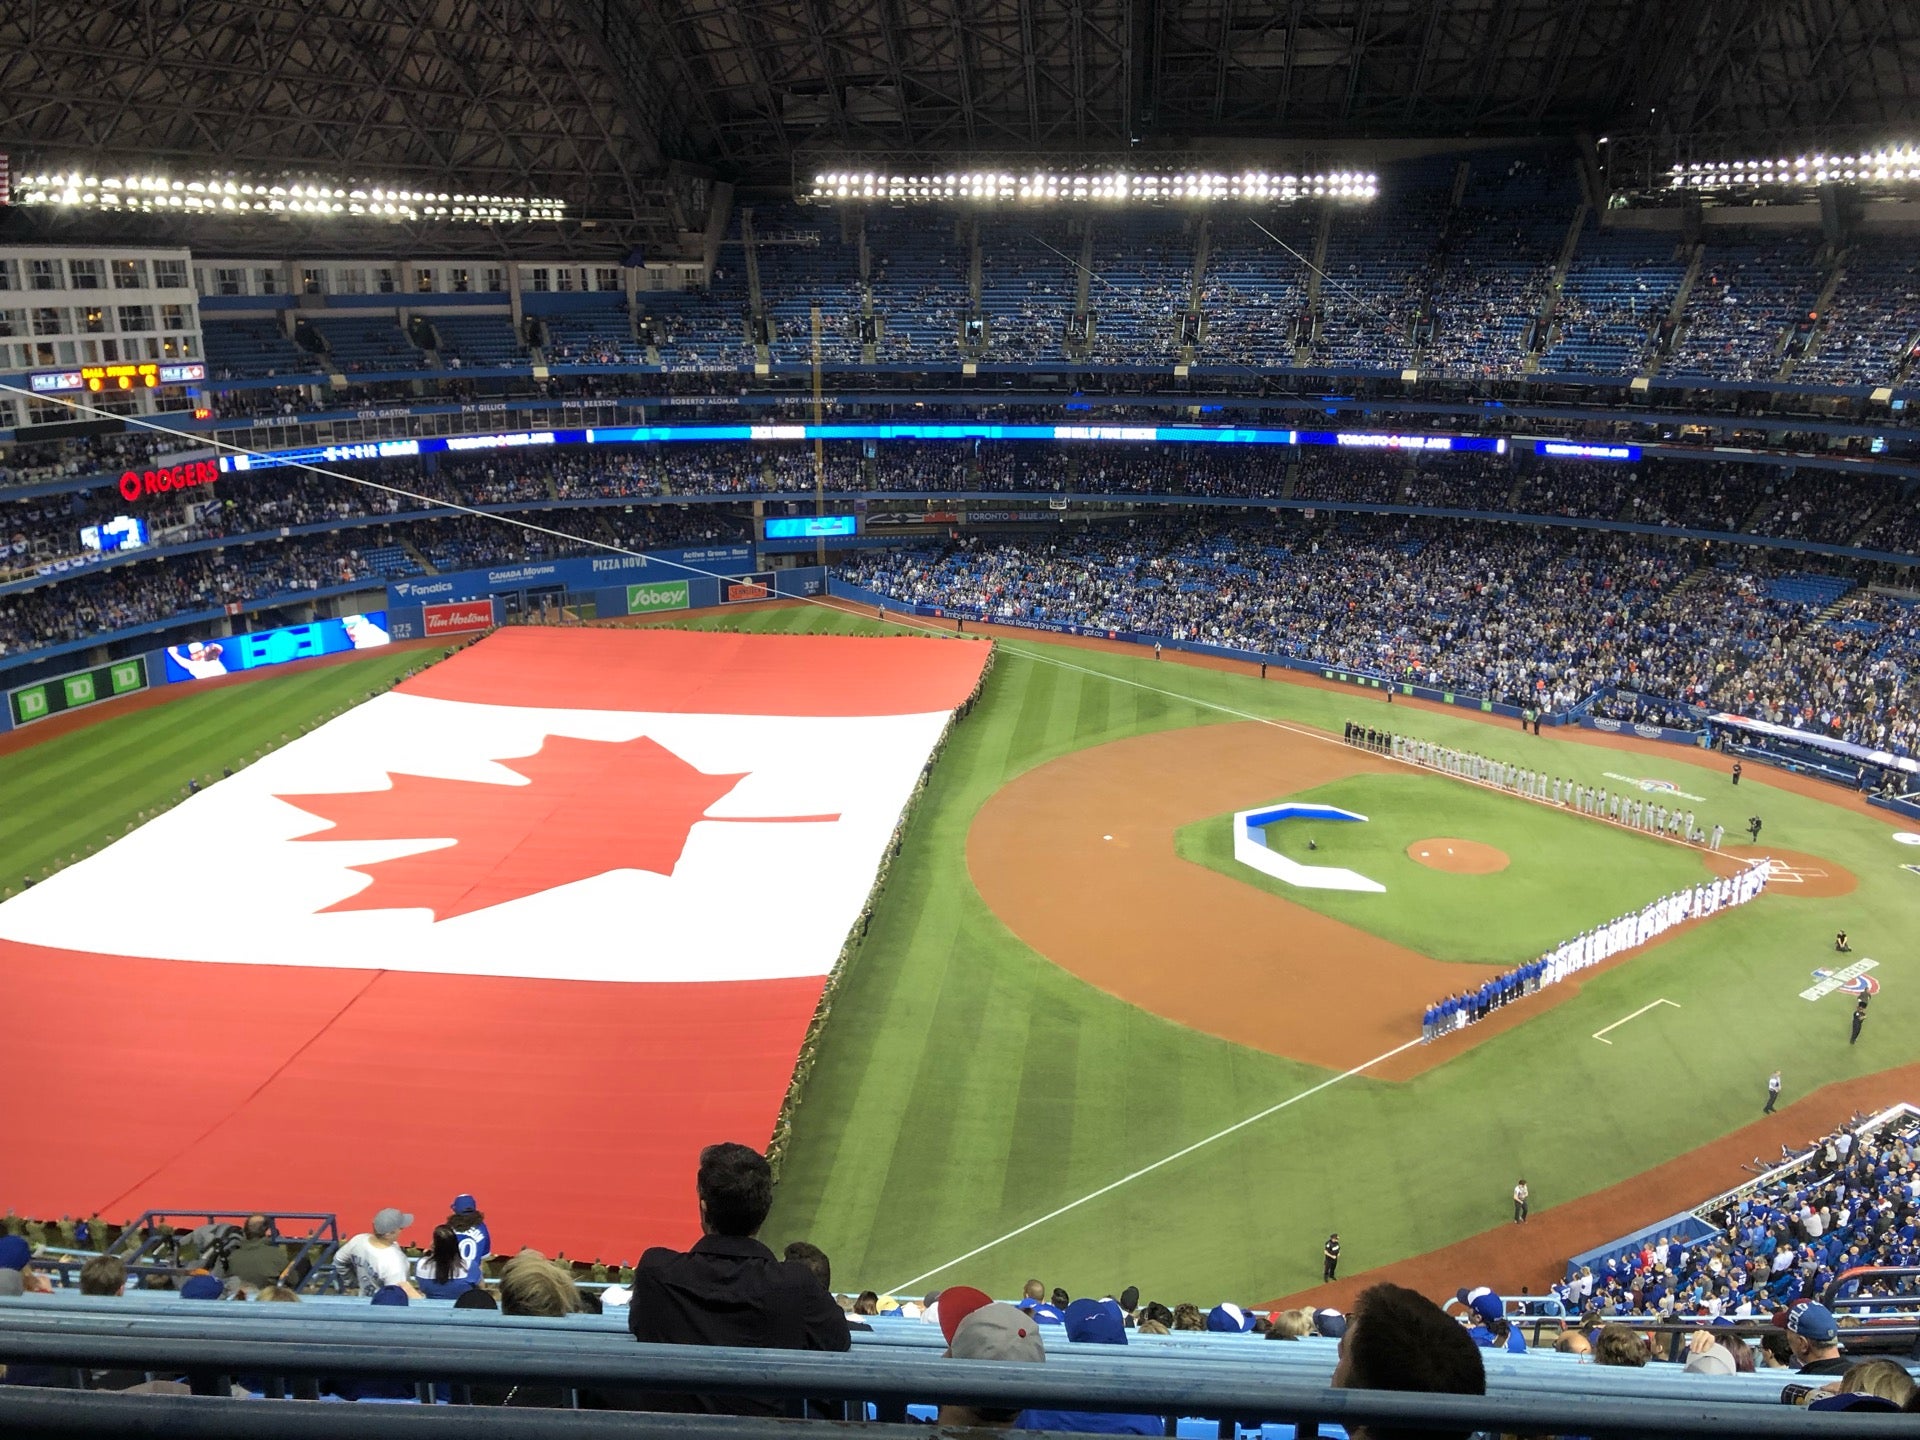 Finding Your Way Around Rogers Centre (Toronto Blue Jays